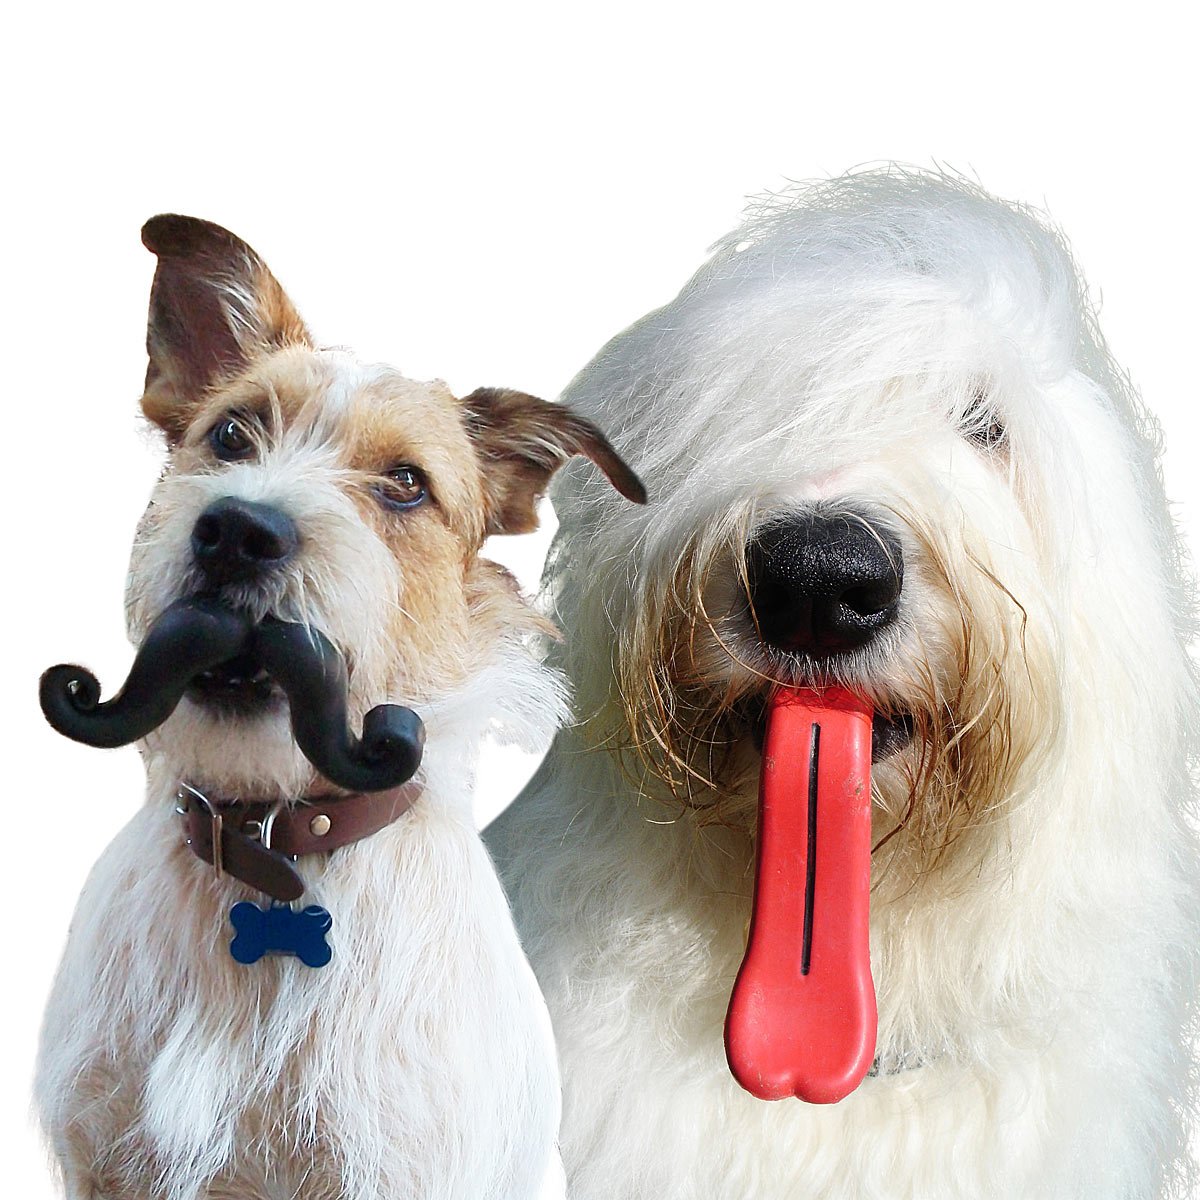 Silly Dog Toys Mustache & Giant Tongue Mustache Dog Toy